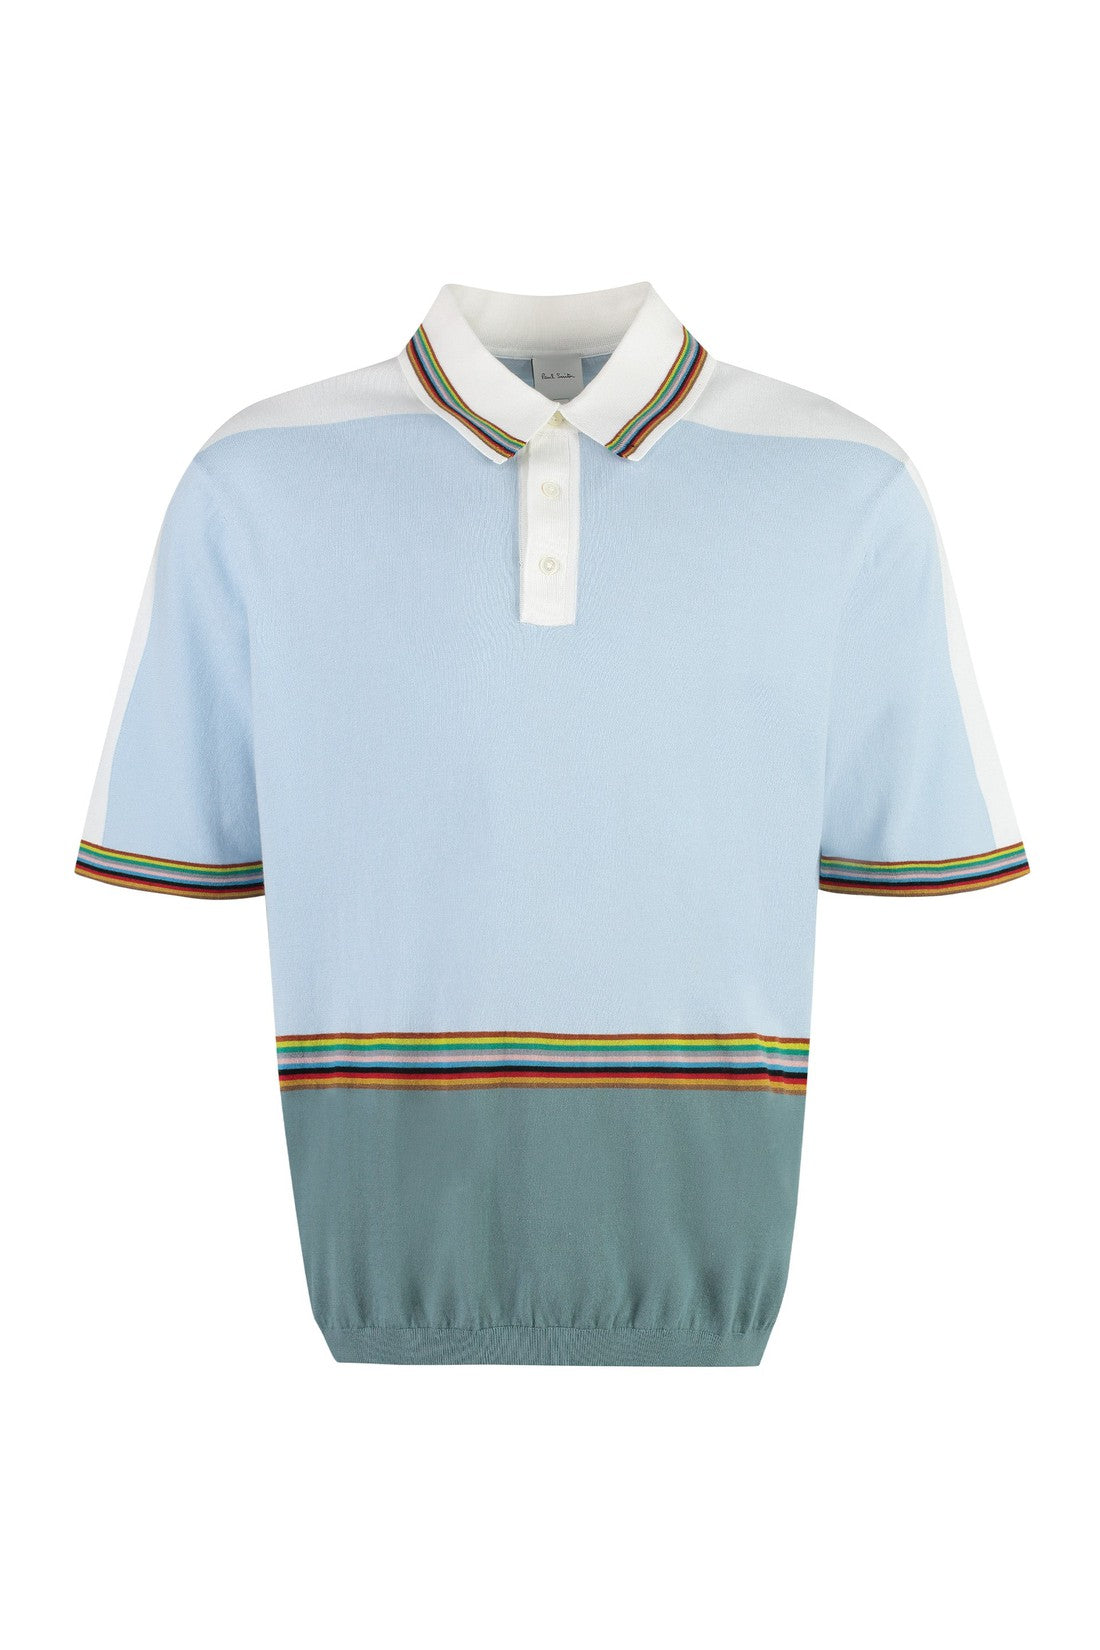 Paul Smith-OUTLET-SALE-Knitted cotton polo shirt-ARCHIVIST